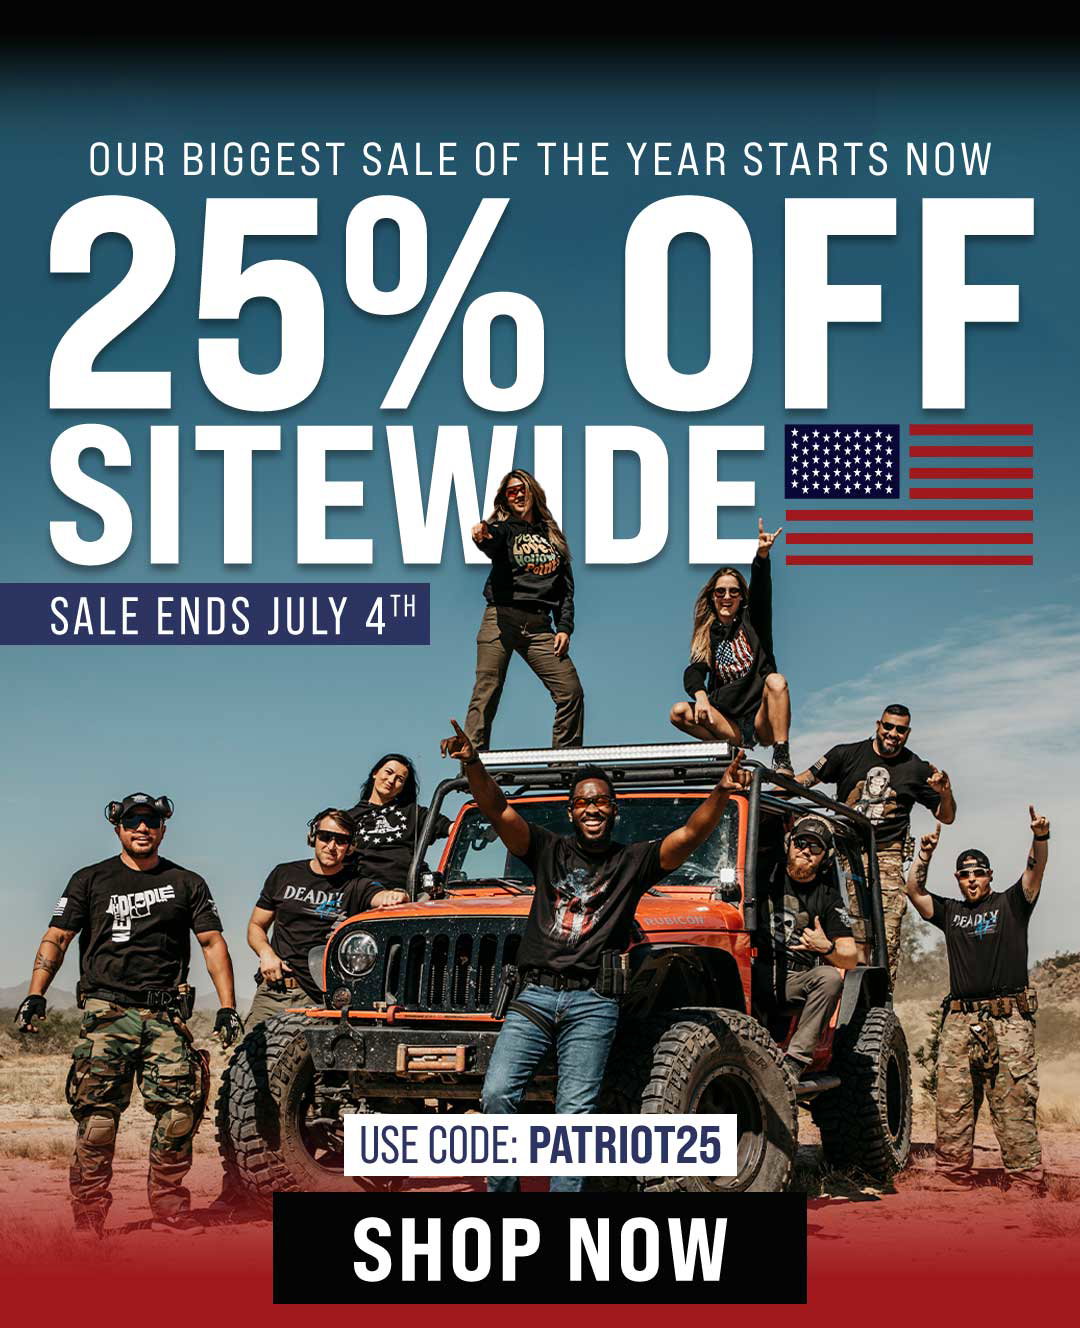 25% OFF Sitewide Sale Starts NOW!